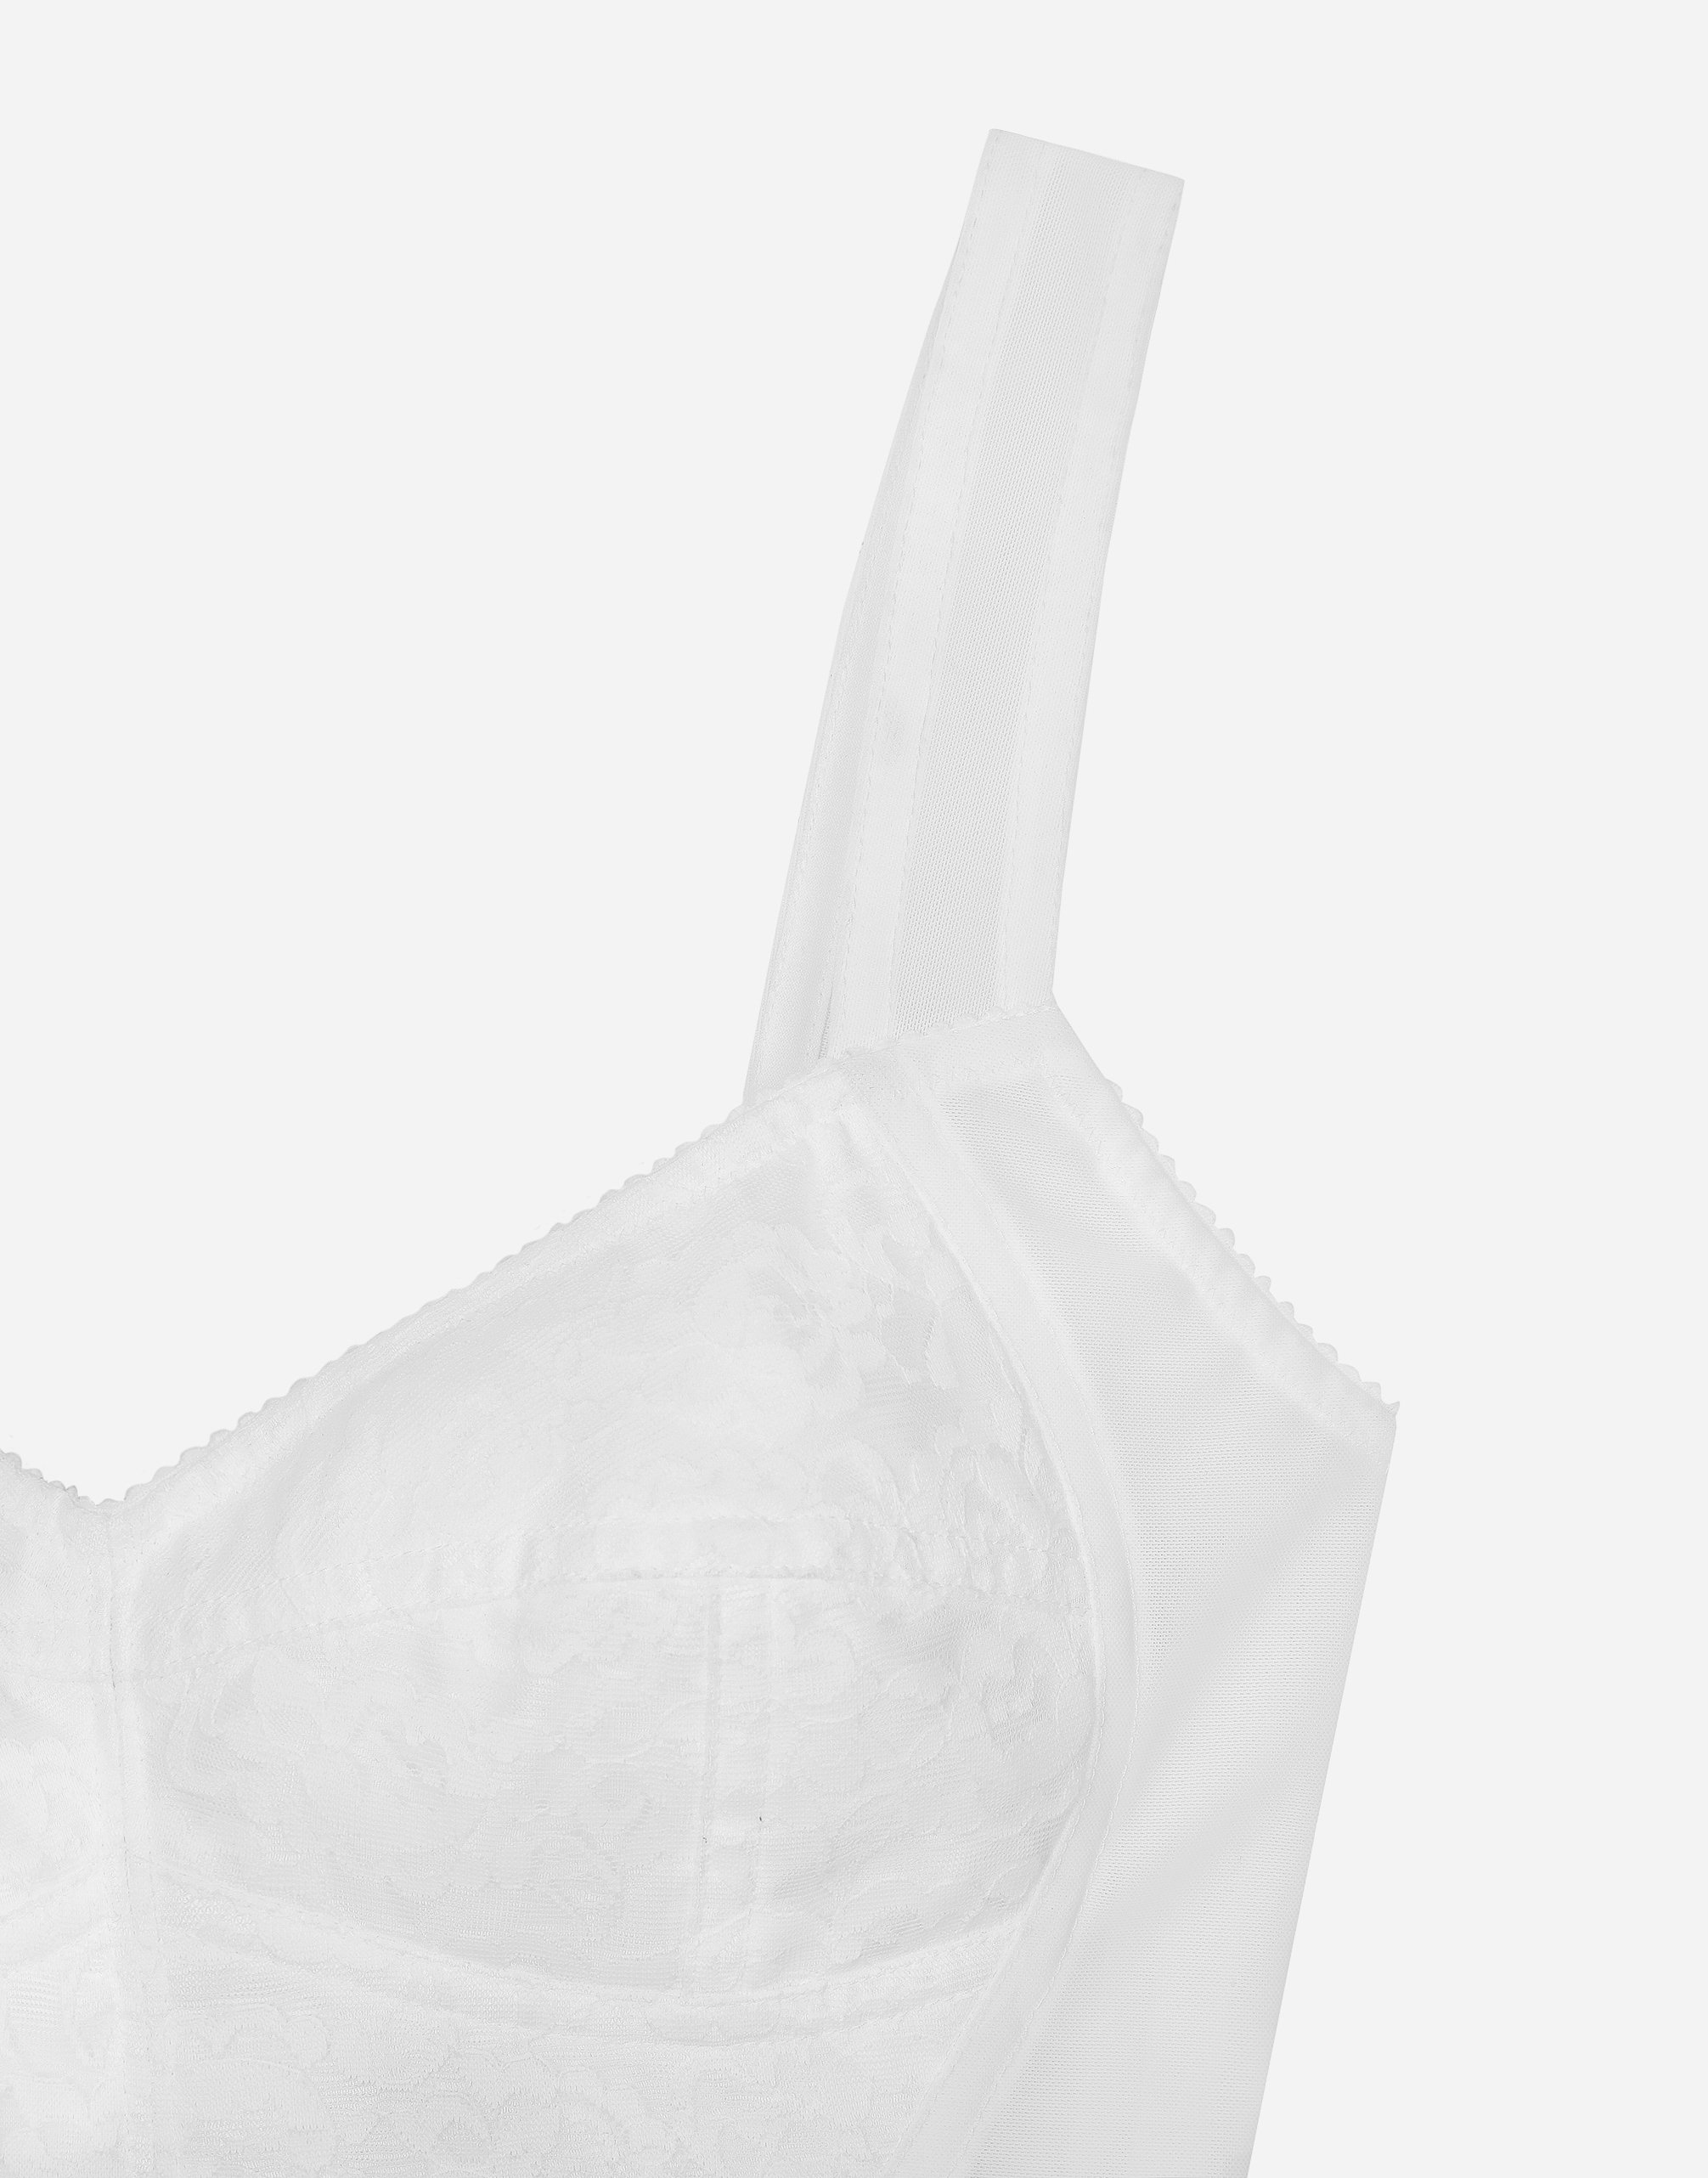 Shaper corset bustier in lace and jacquard in White